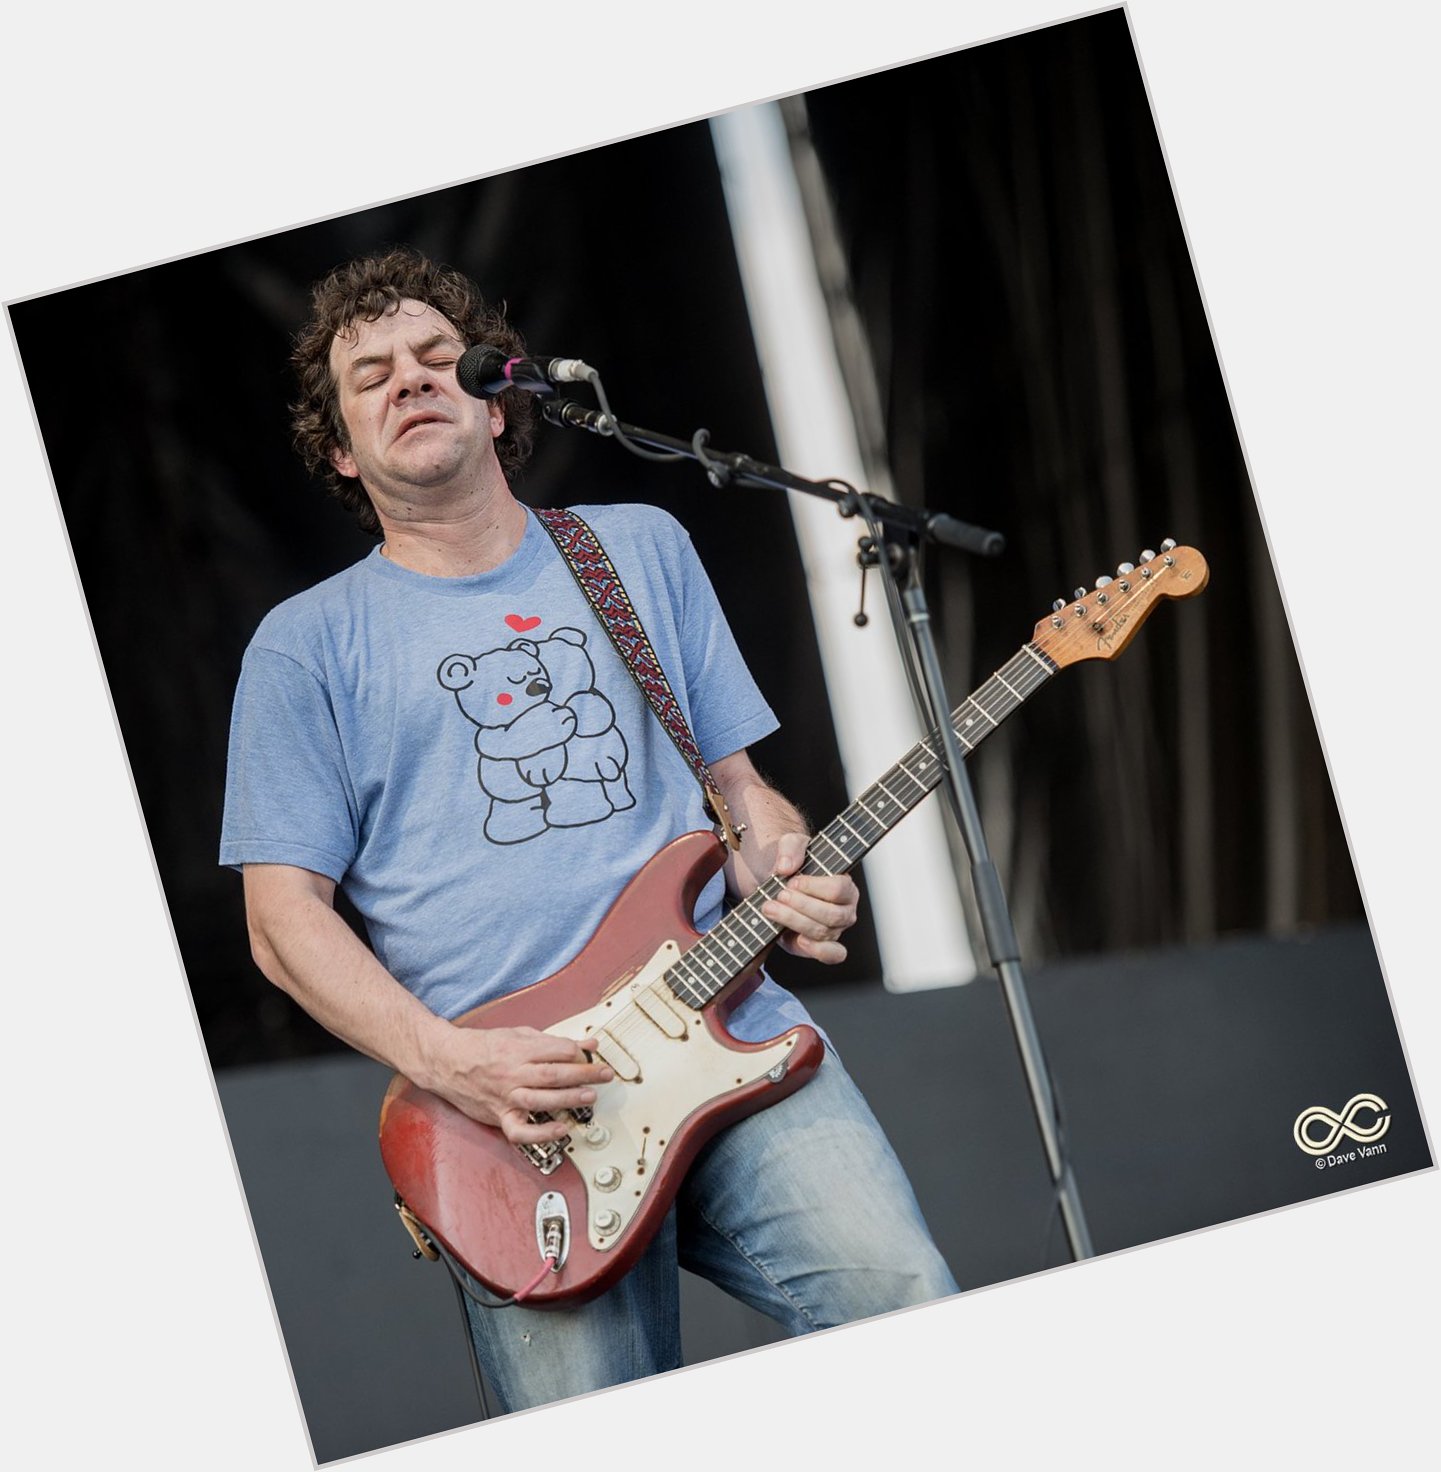 All hail the great Boognish! Happy birthday to Dean Ween! : Dave Vann  